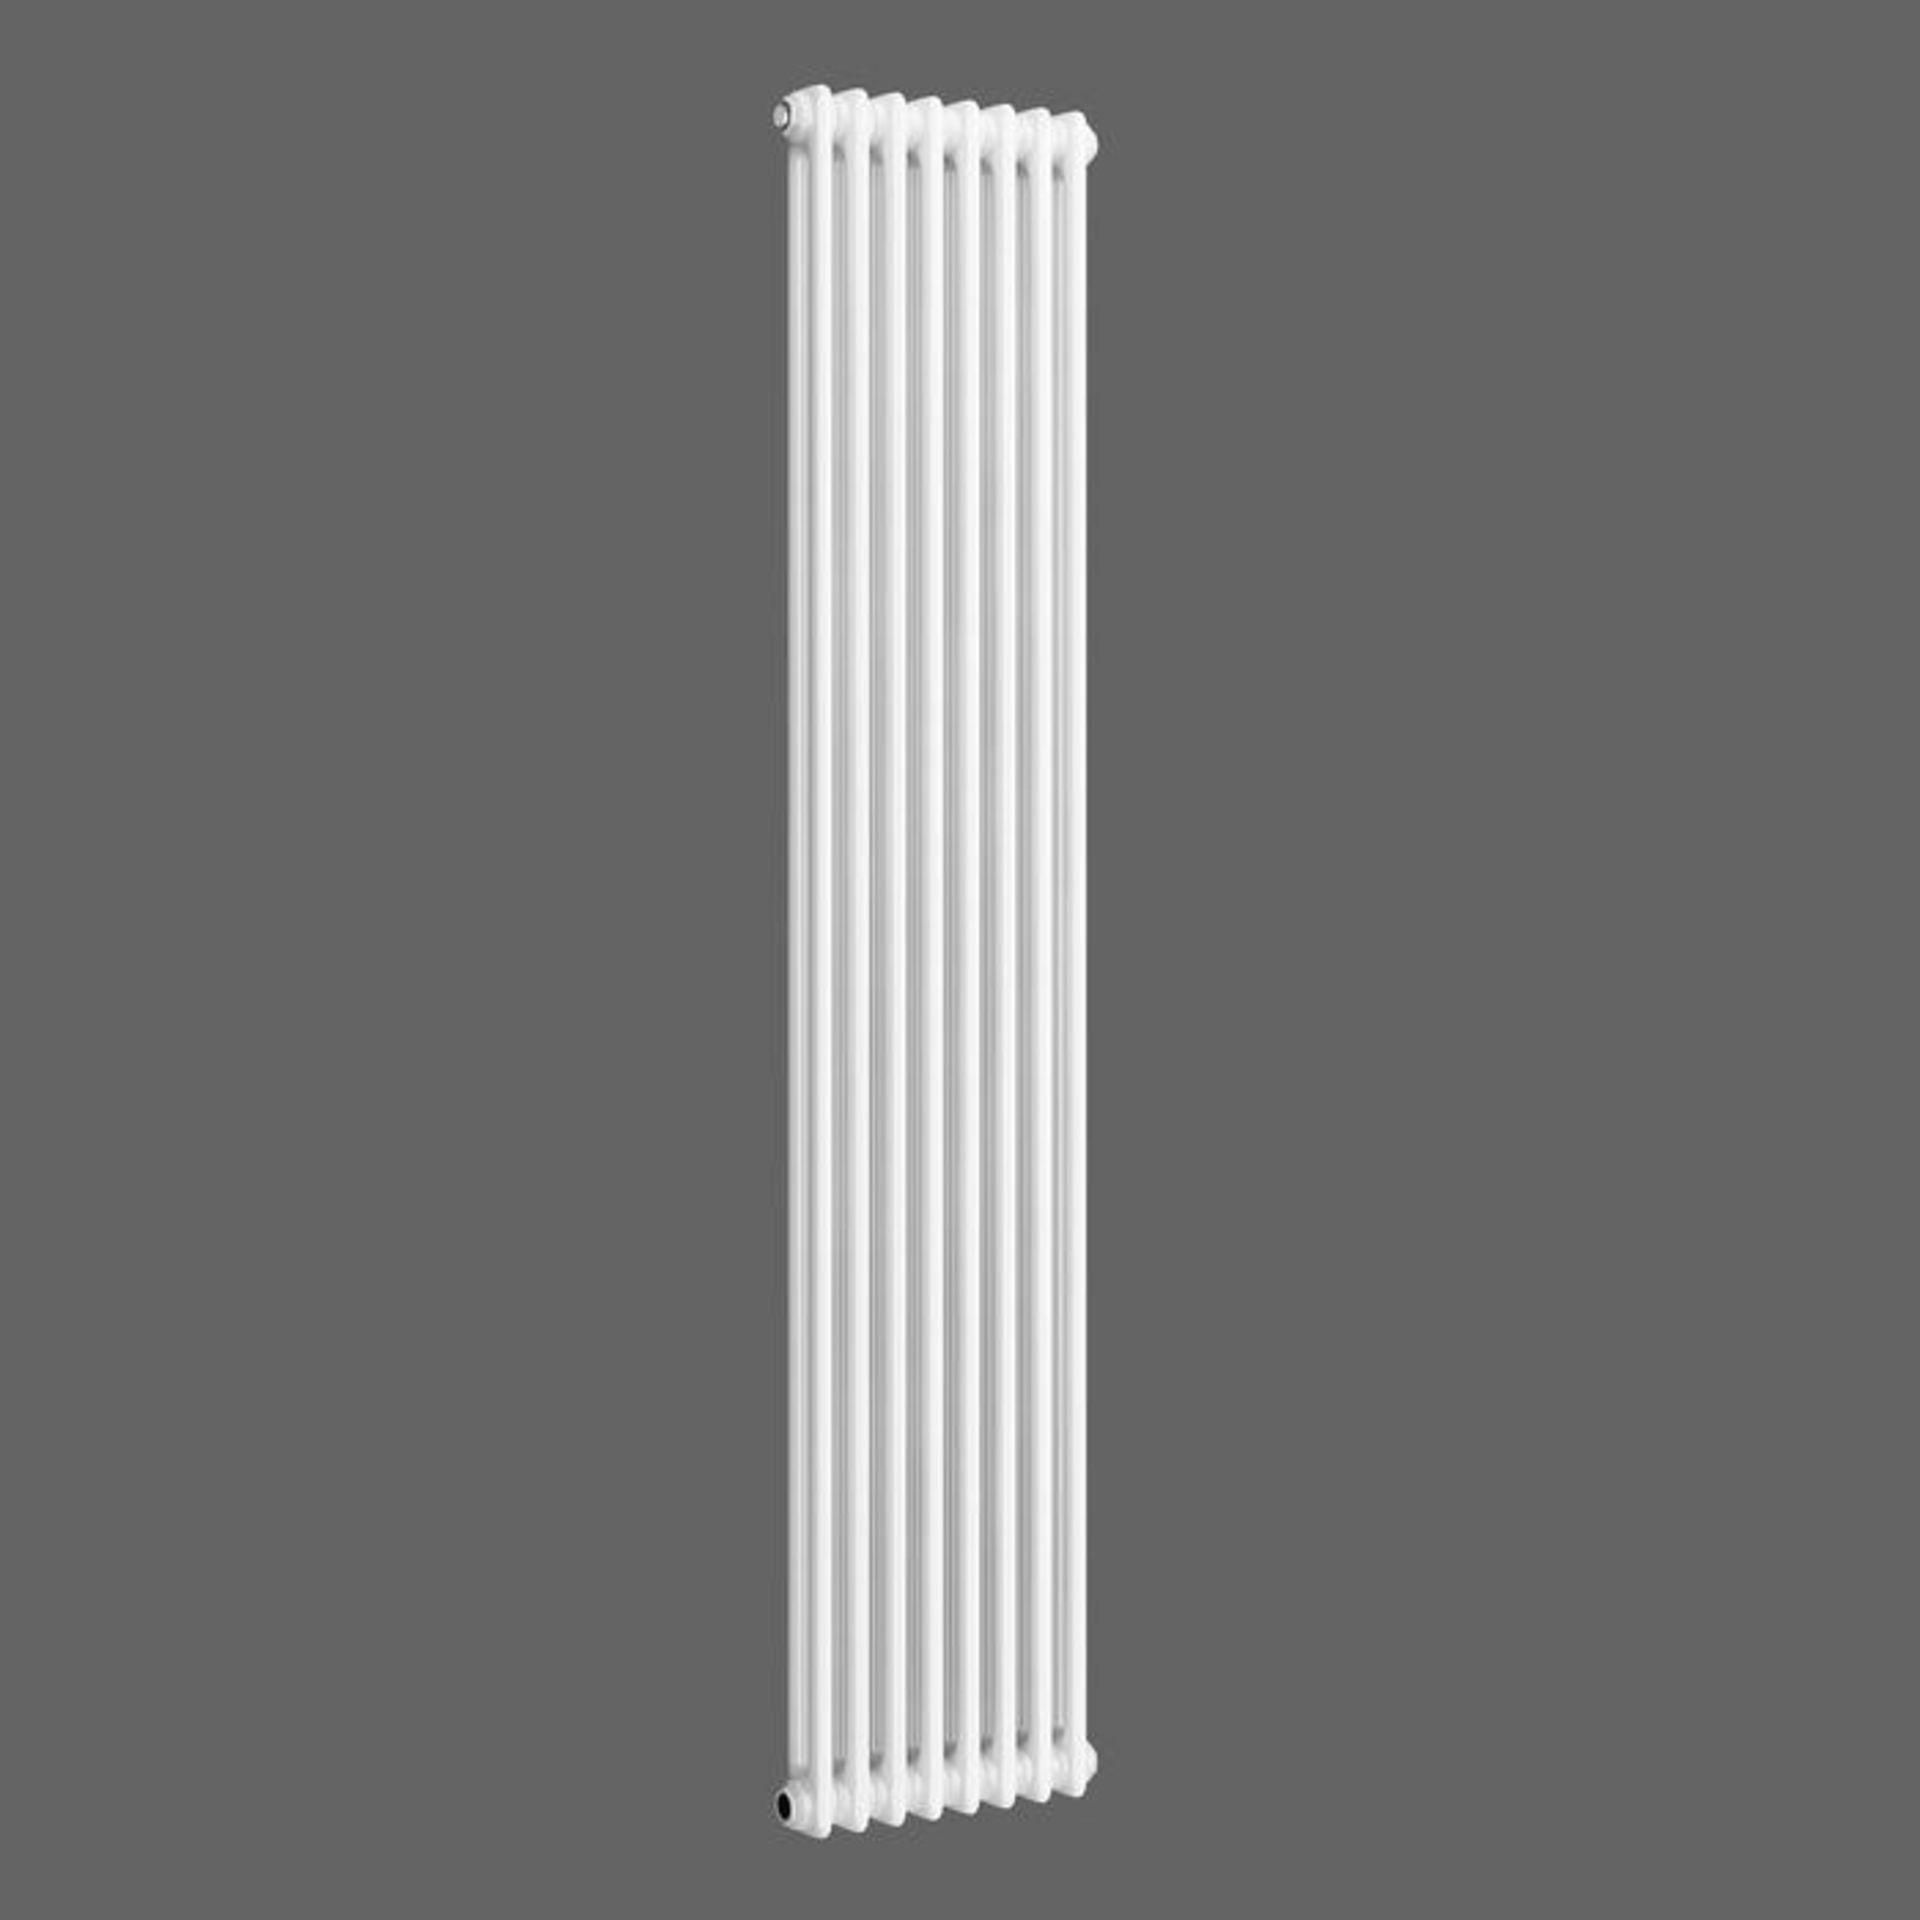 (JL121) 2000x490mm White Double Panel Vertical Colosseum Traditional Radiator. RRP £519.99. ...(( - Image 4 of 4